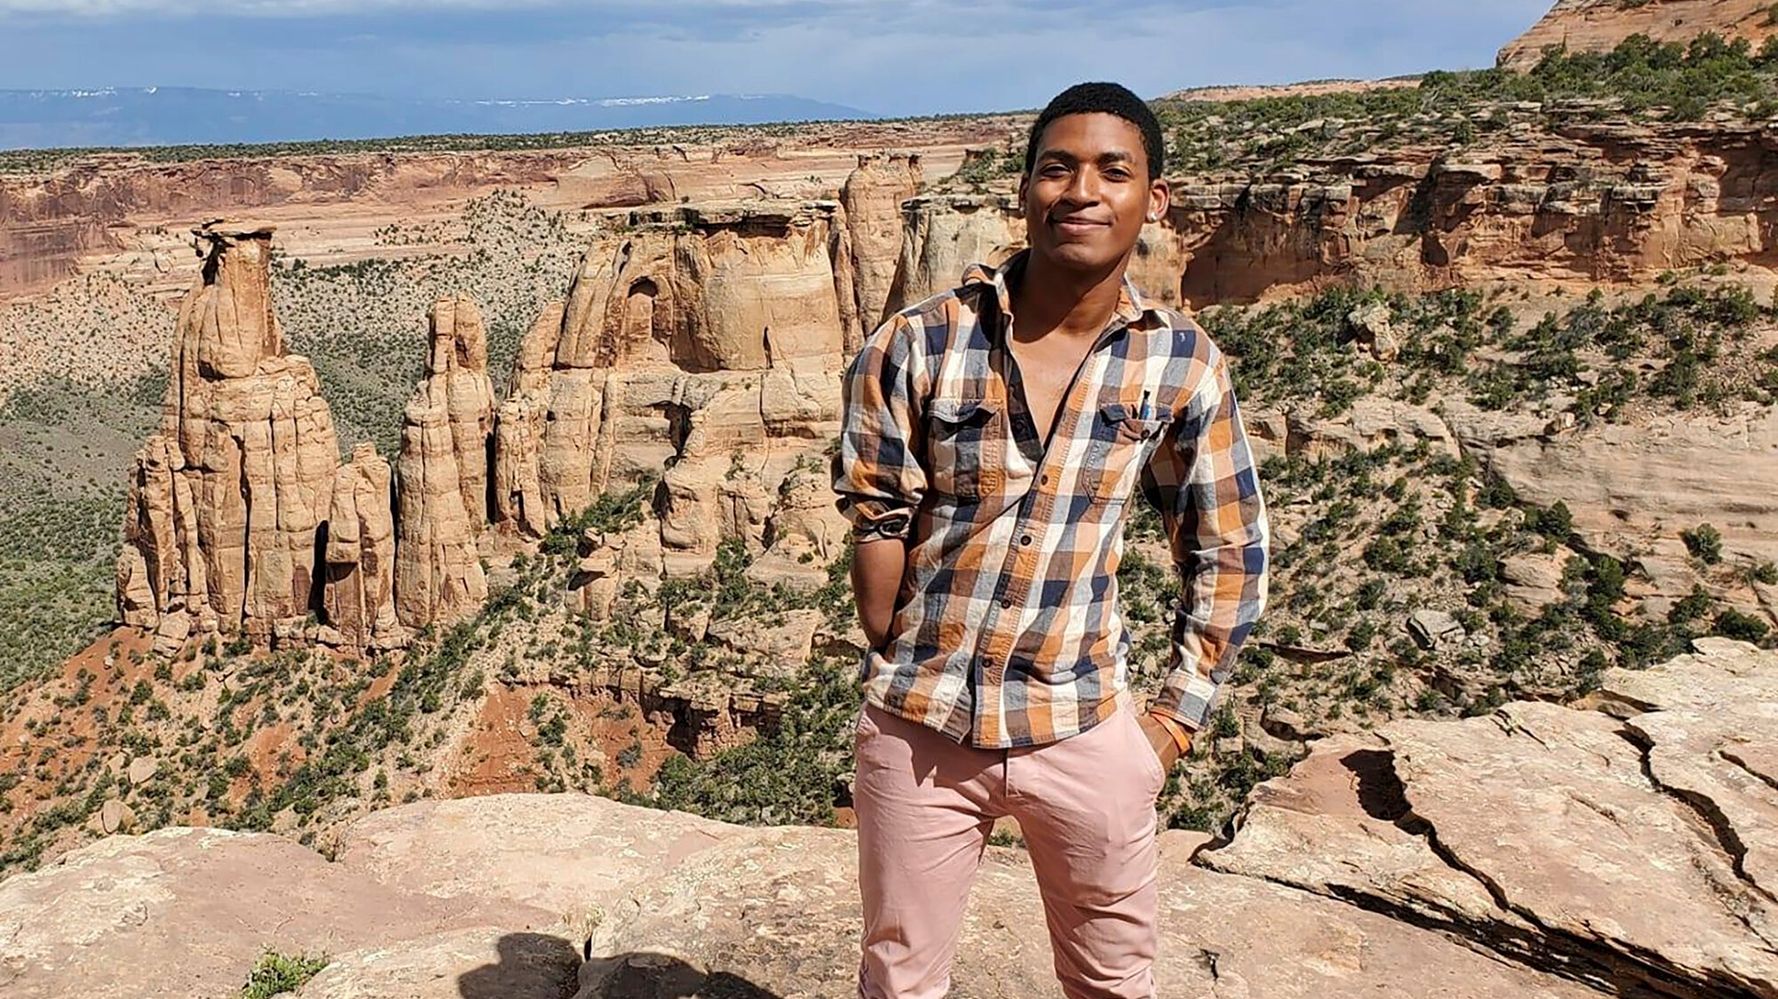 What We Know About Missing Arizona Geologist Daniel Robinson